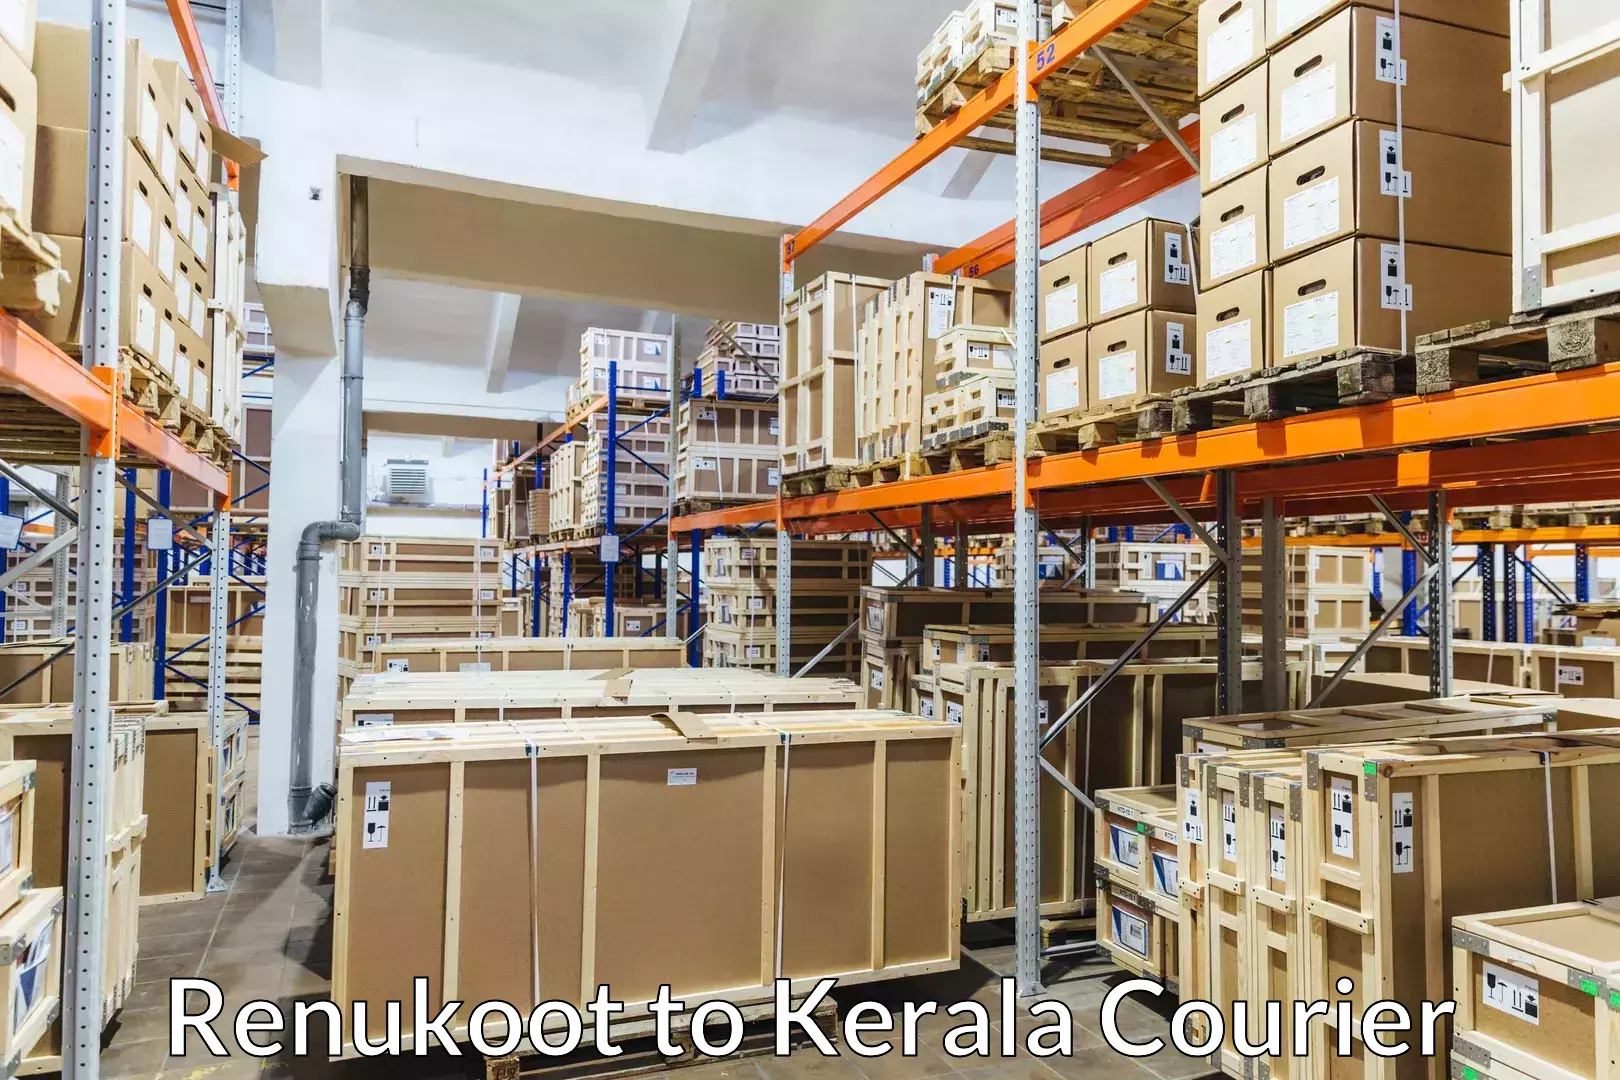 Reliable baggage delivery in Renukoot to Cochin Port Kochi